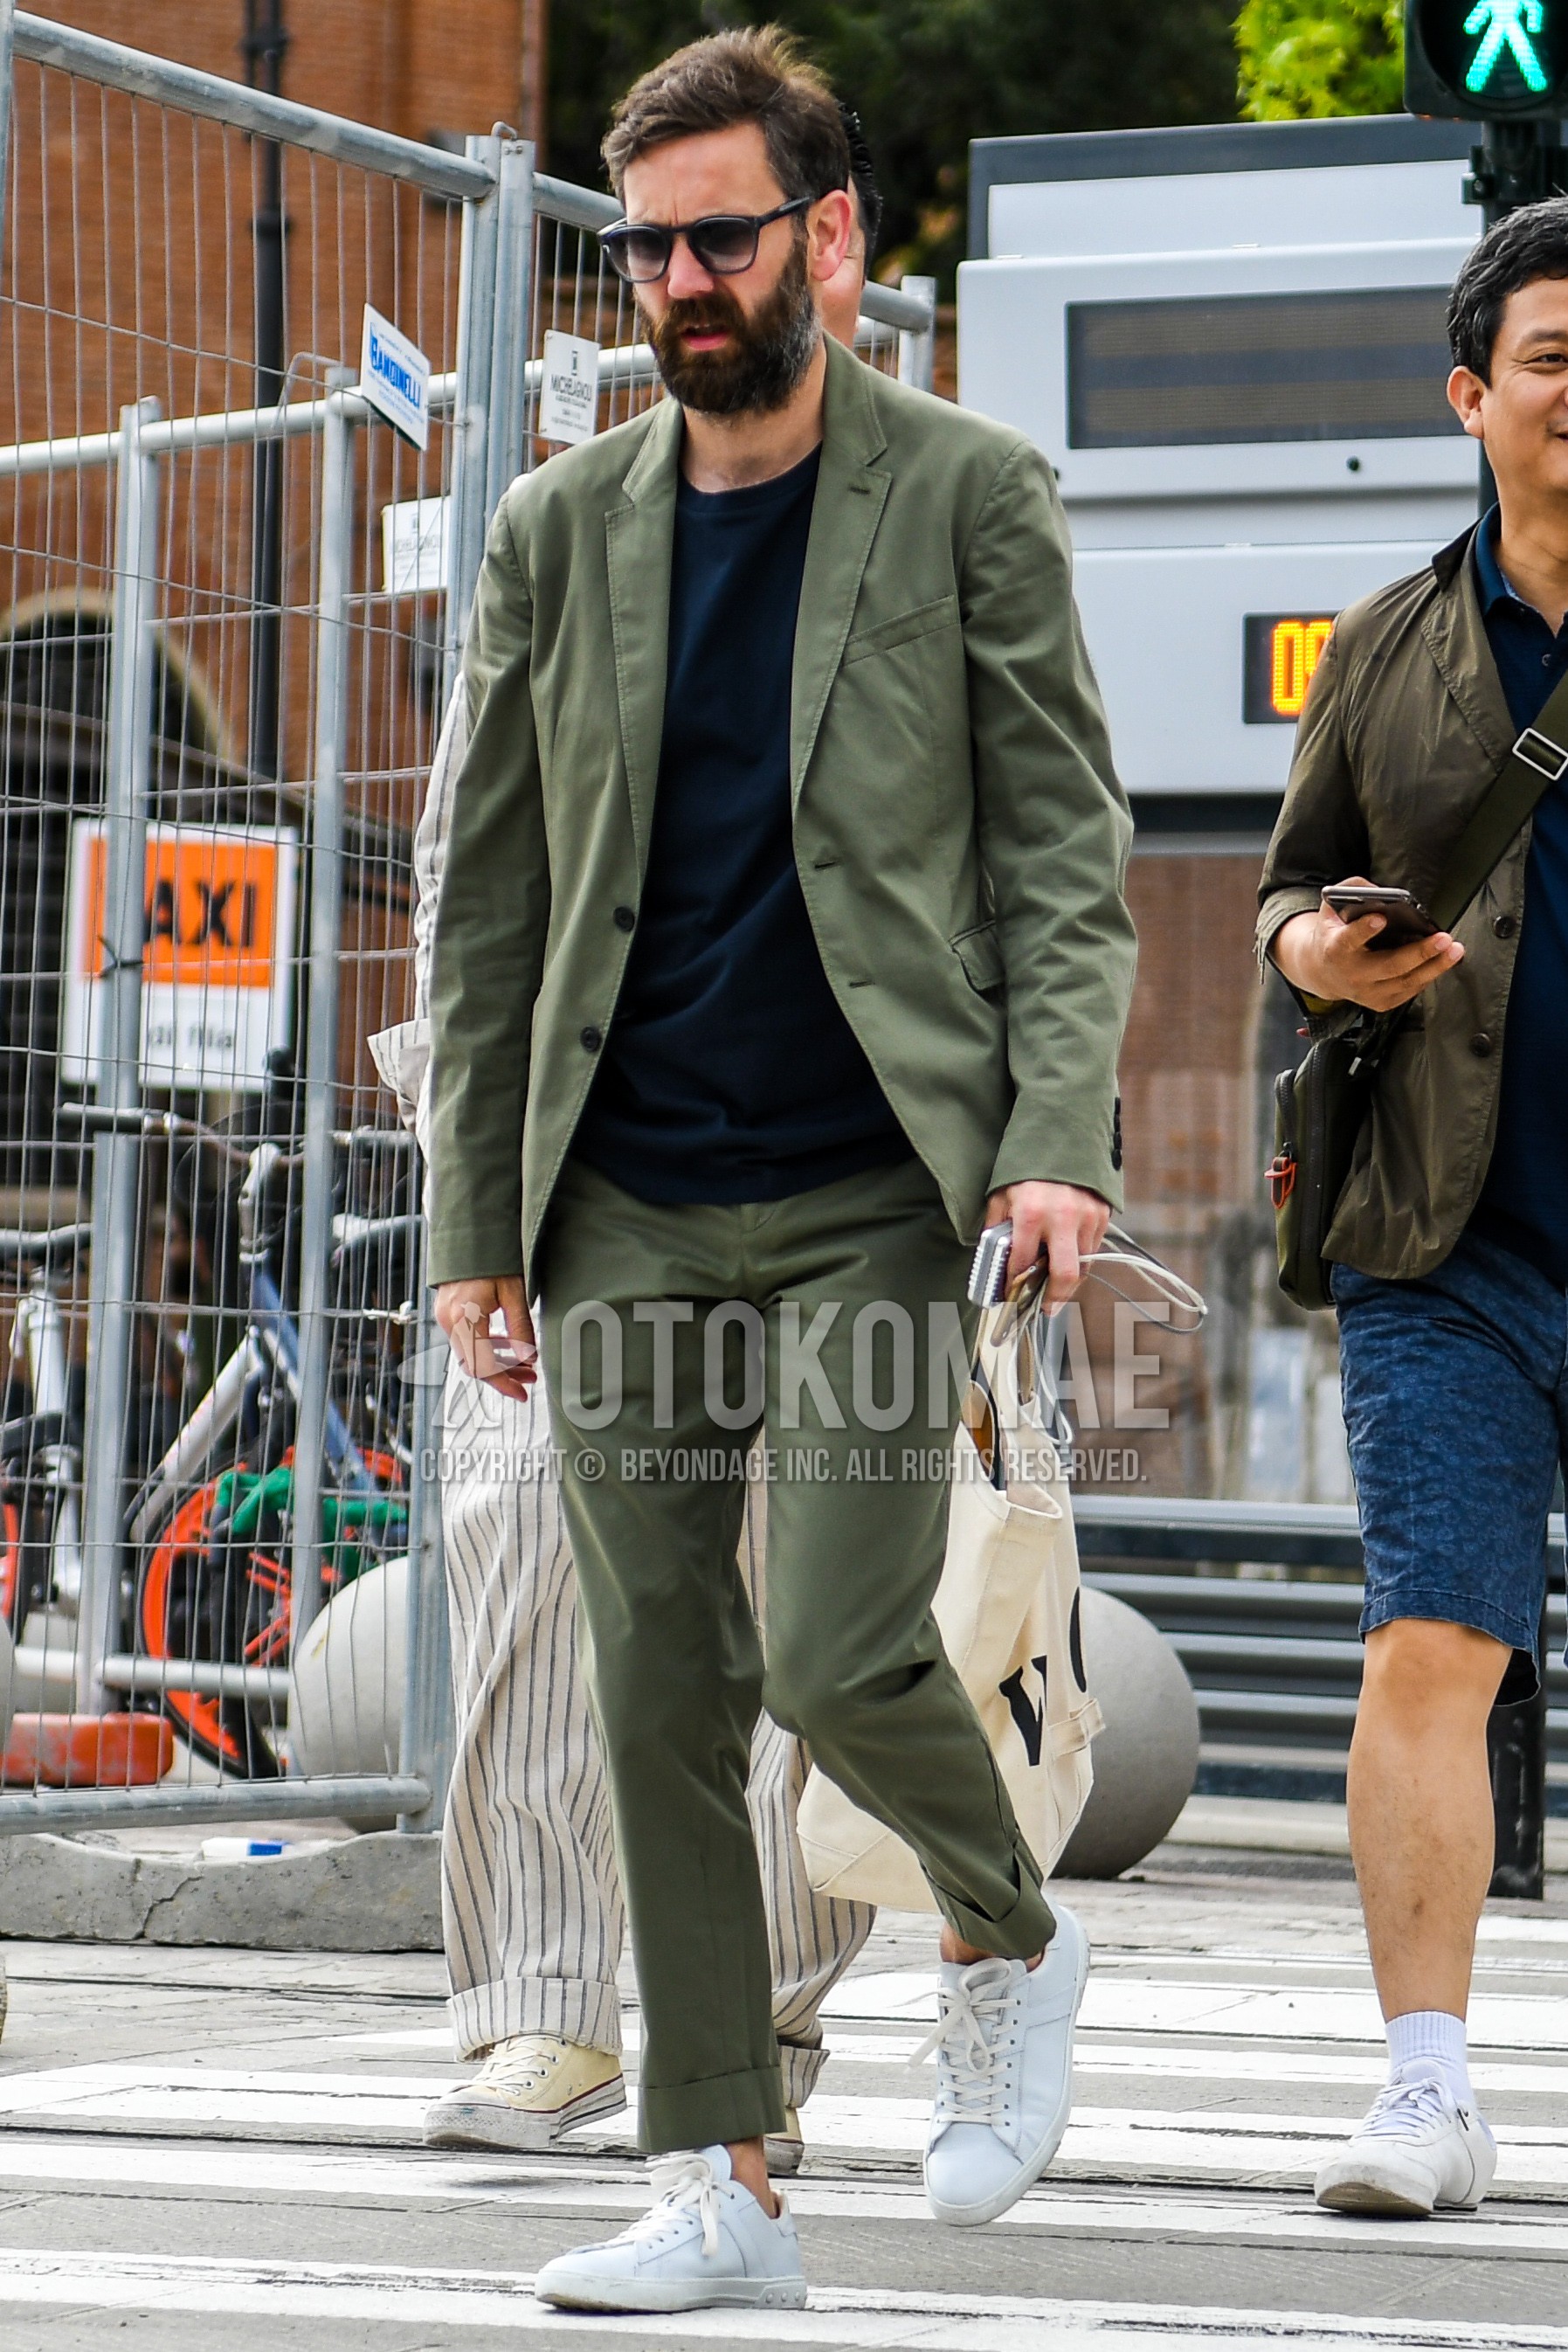 Men's spring summer autumn outfit with navy plain t-shirt, white low-cut sneakers, olive green plain suit.